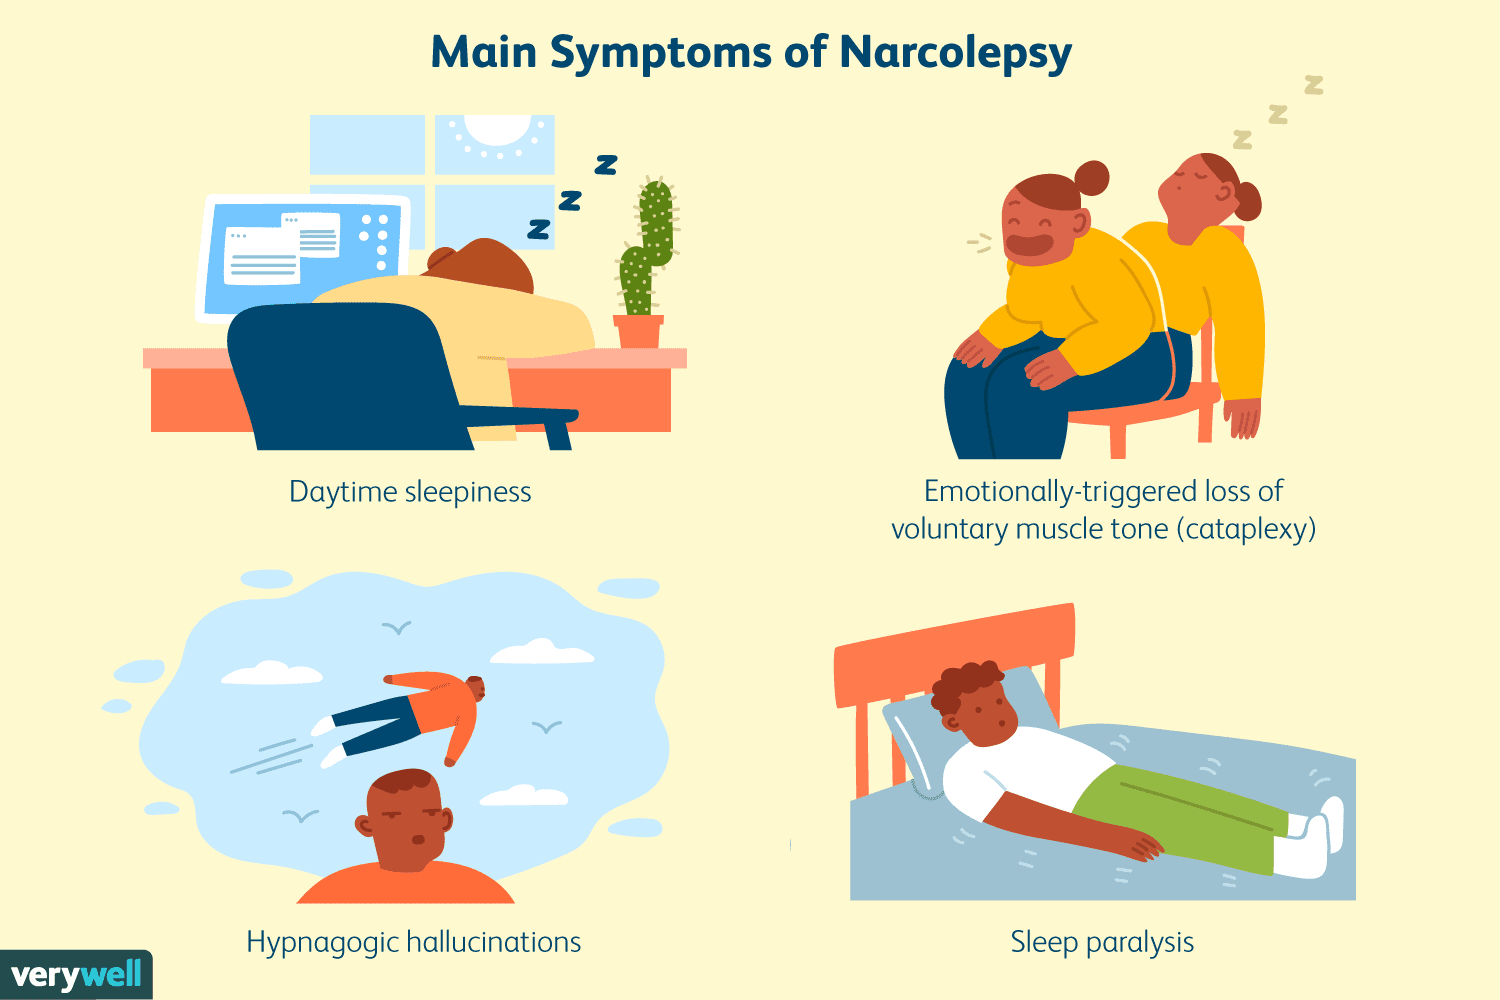 How does narcolepsy affect daily life?